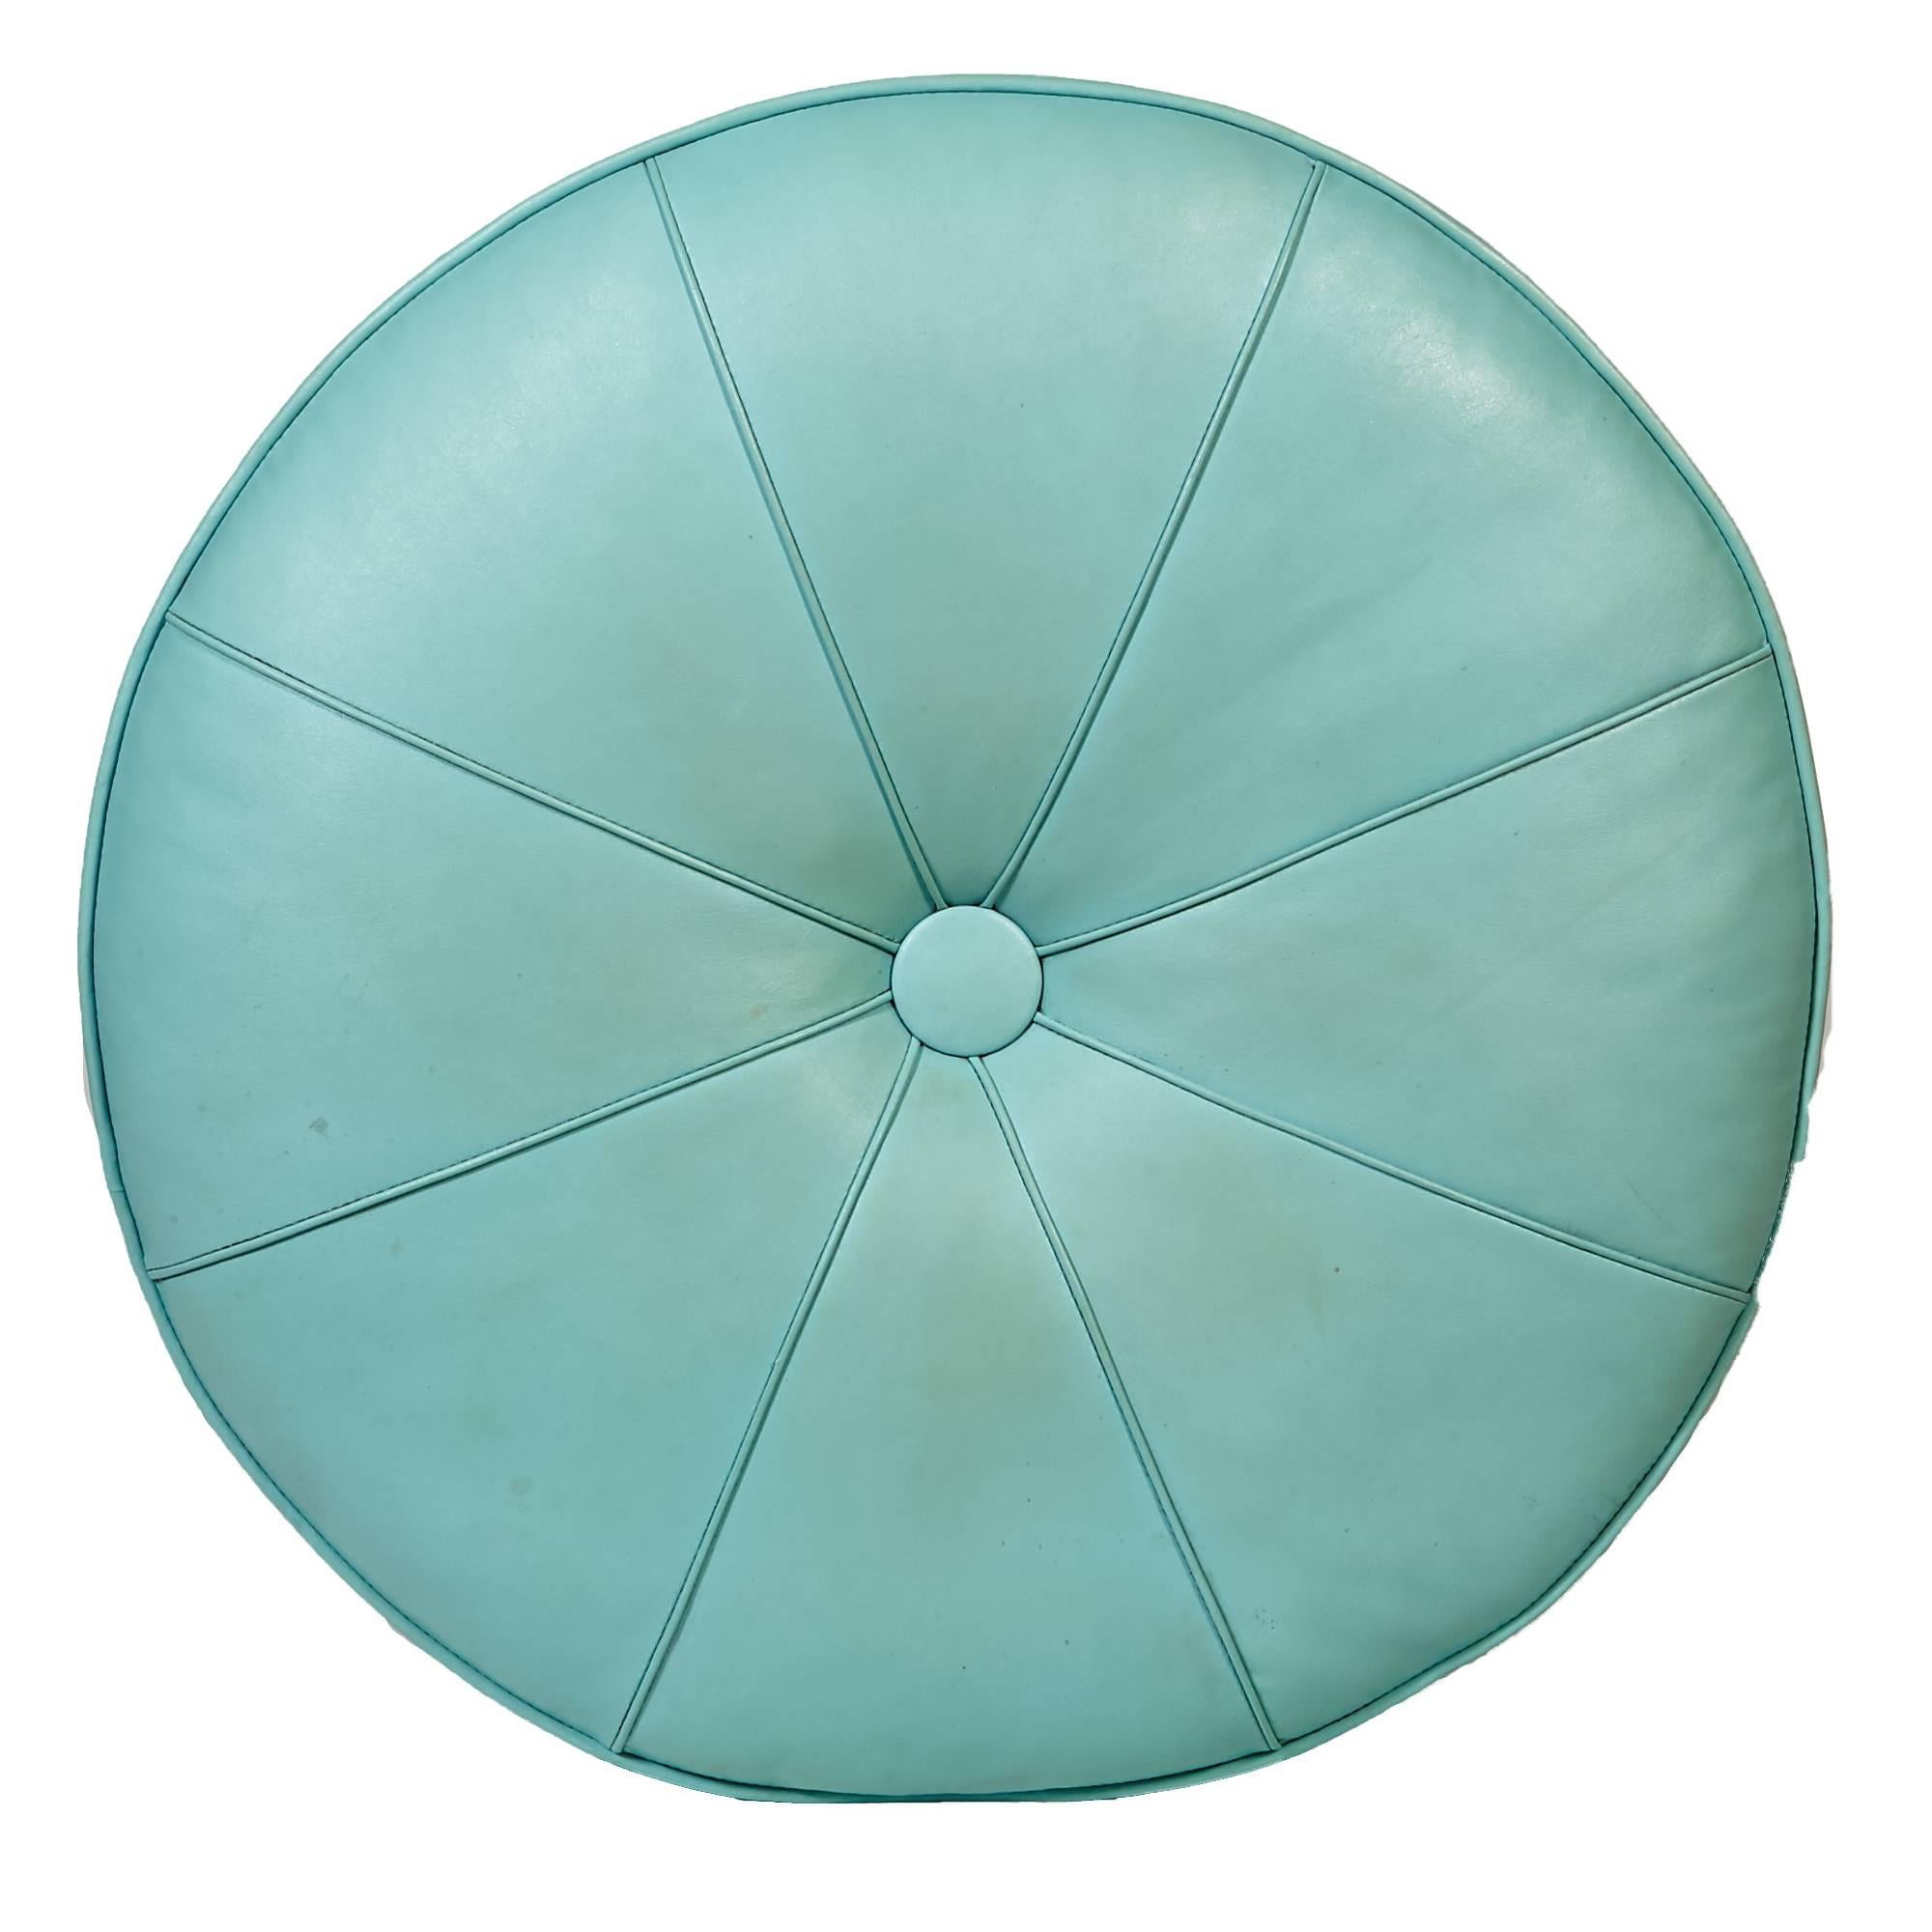 Mid-Century Modern 1960s Turquoise Over-Sized Round Pouf / Ottoman For Sale